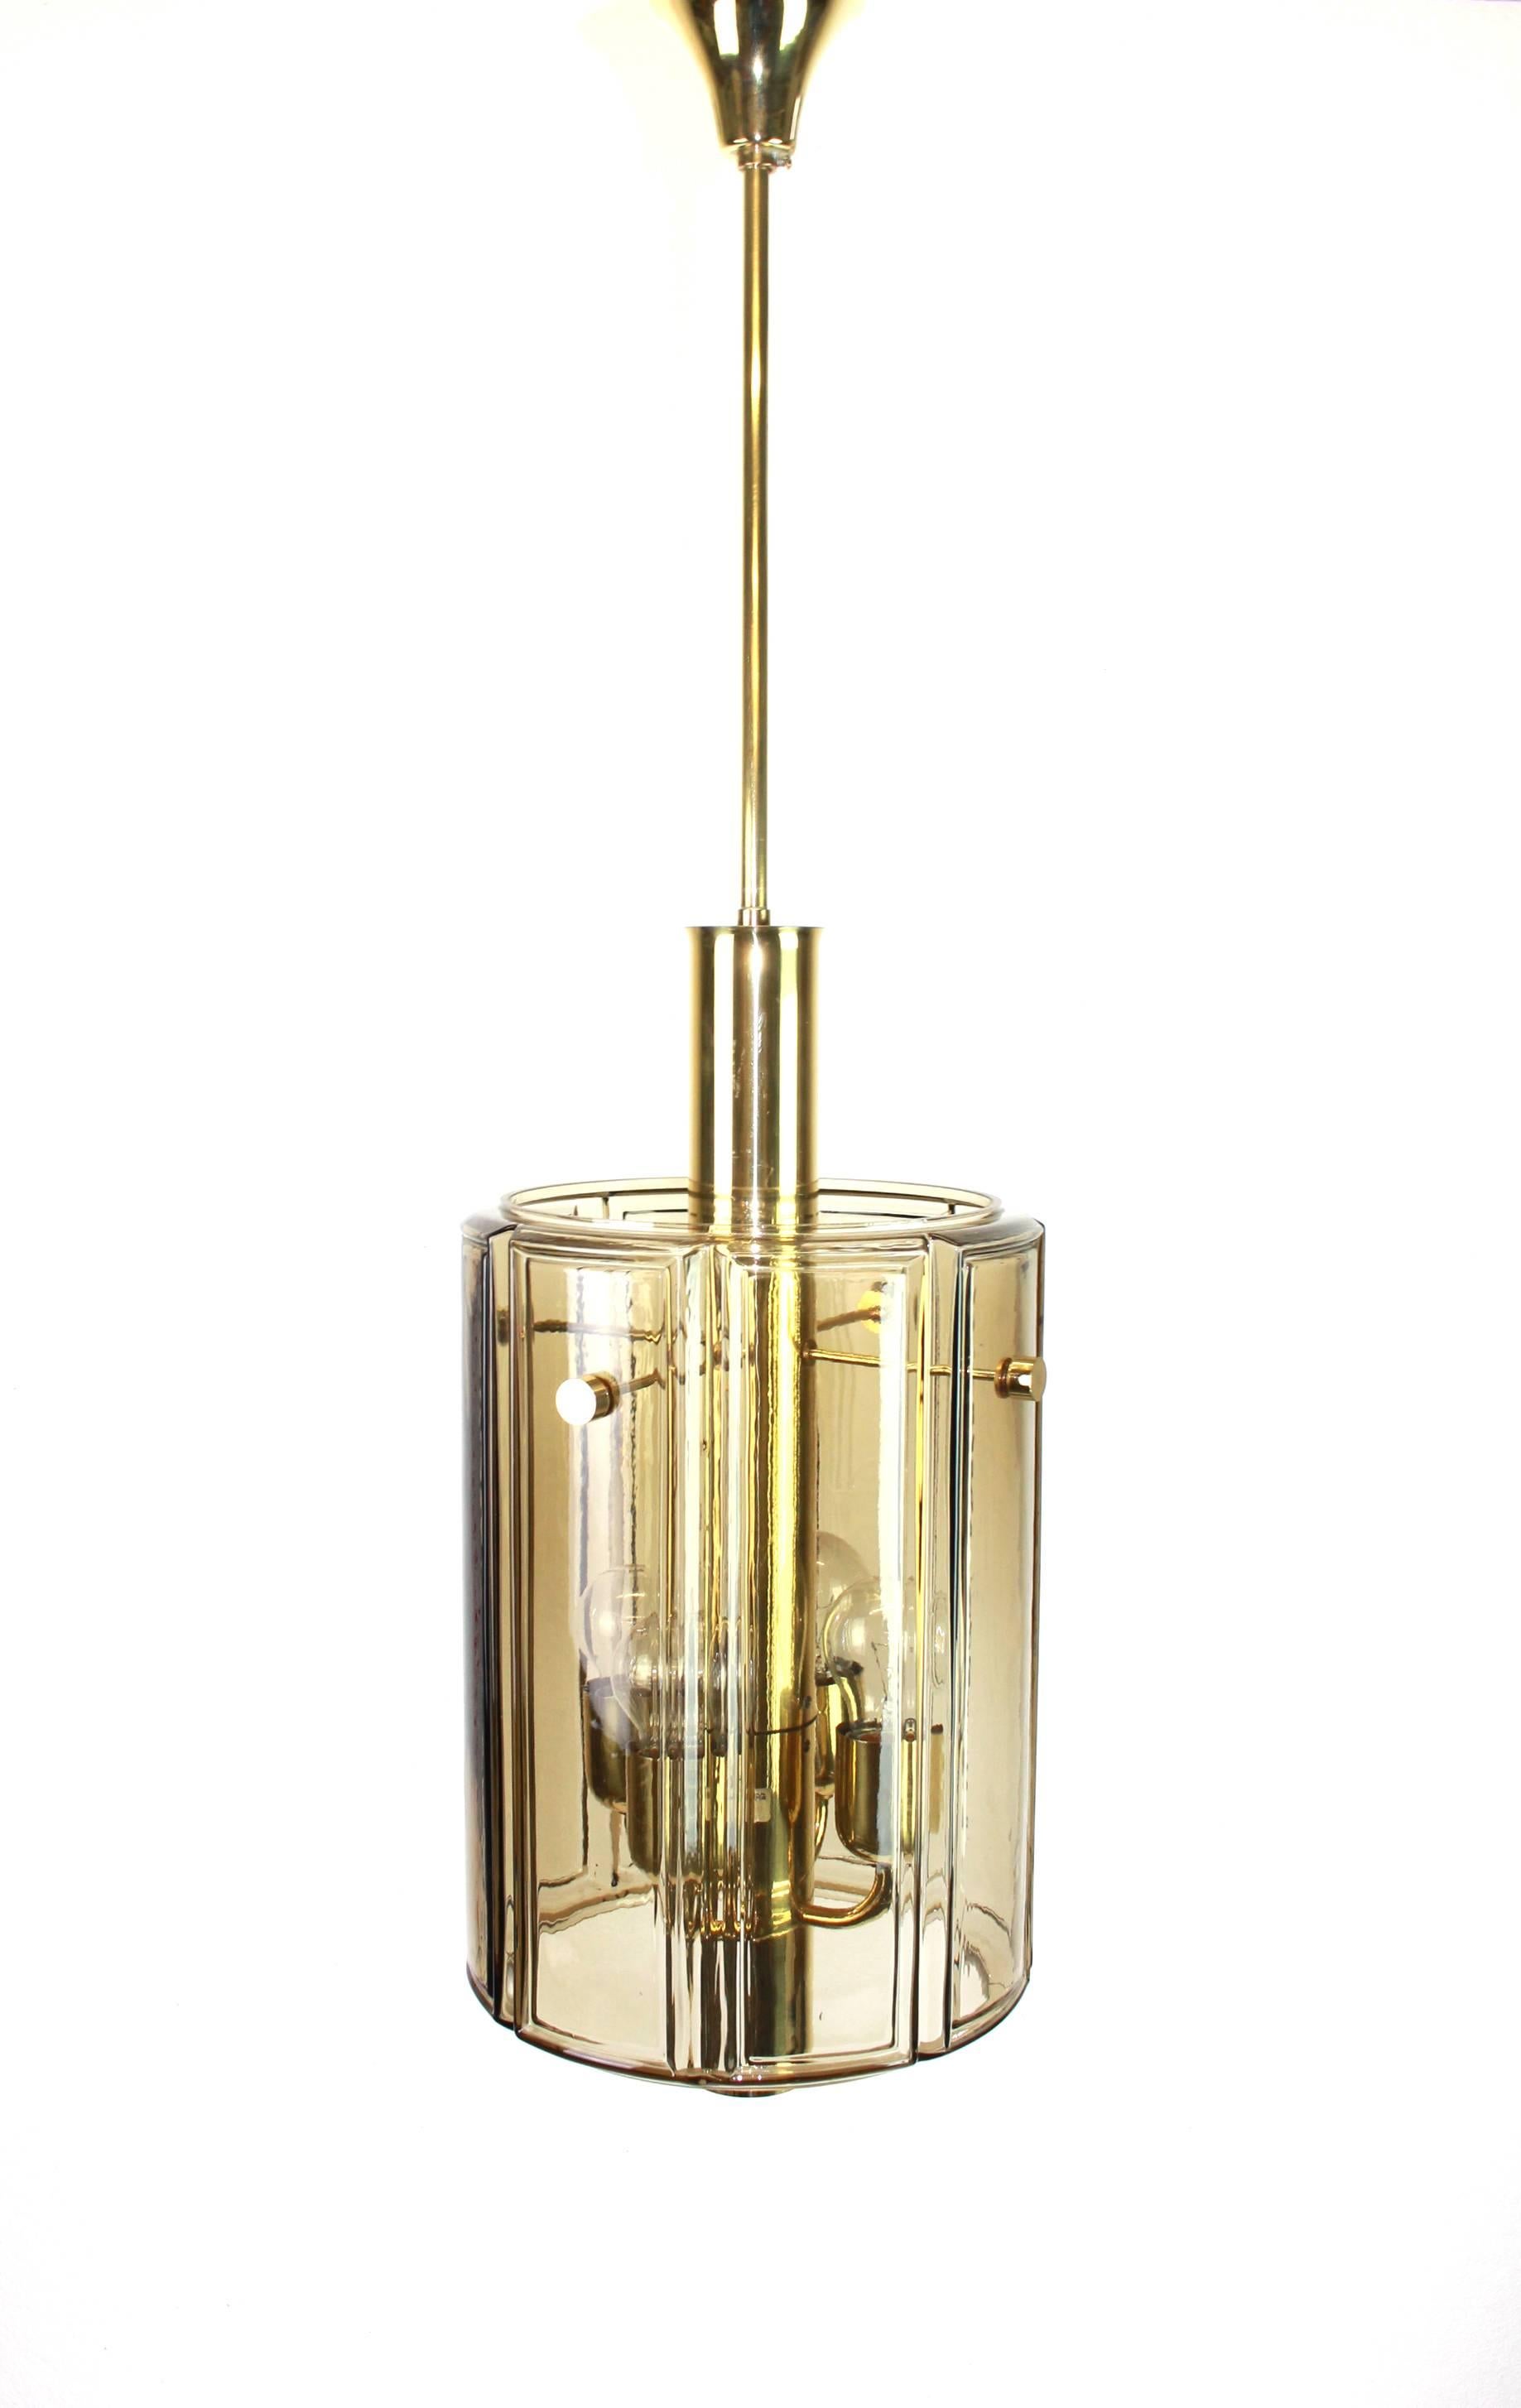 Brass lantern form pendant with smoked glass panels by Limburg, Germany, 1960s
Sockets: Four x E27 standard bulbs.
 
Very good condition.
Small signs of age and use.
Six pieces available.
Drop rod can be adjusted as required, free of charge,